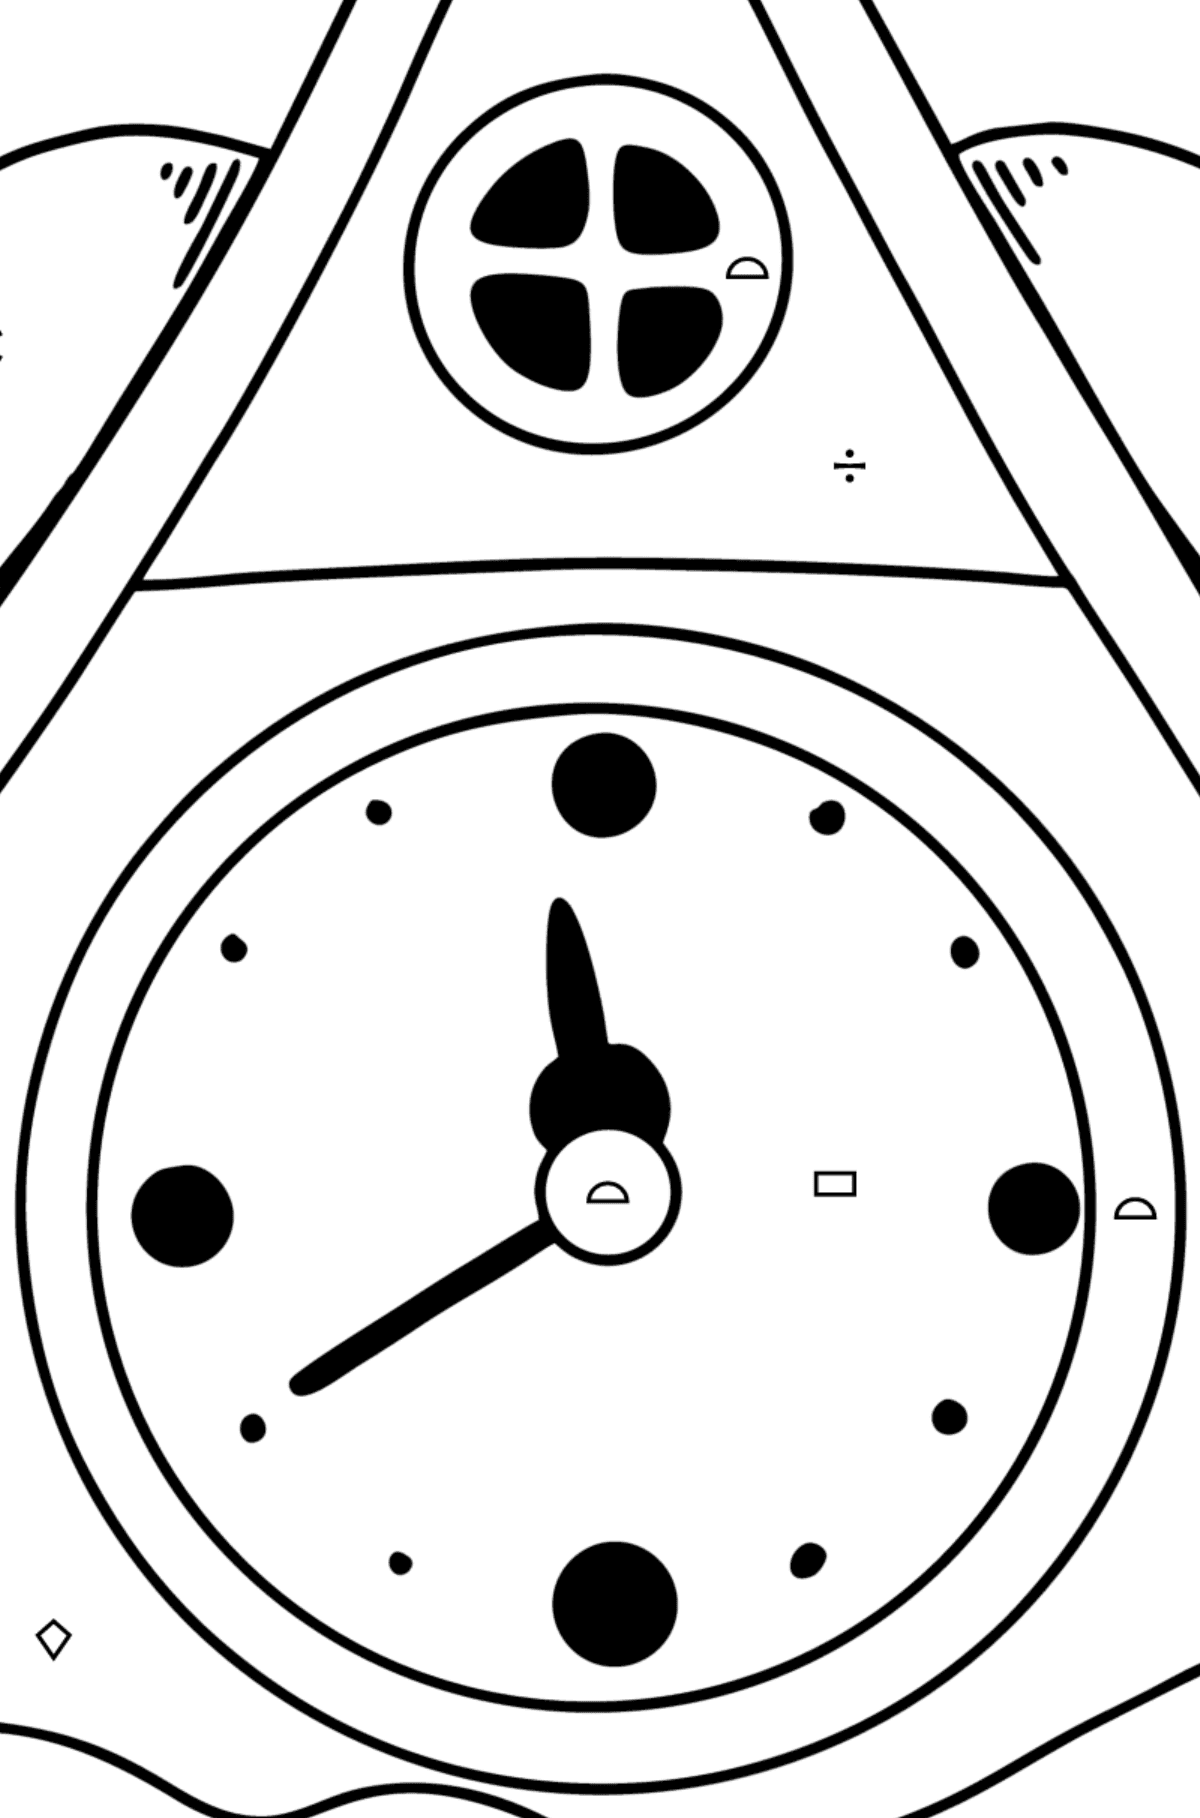 Christmas Clock coloring page - Coloring by Symbols and Geometric Shapes for Kids